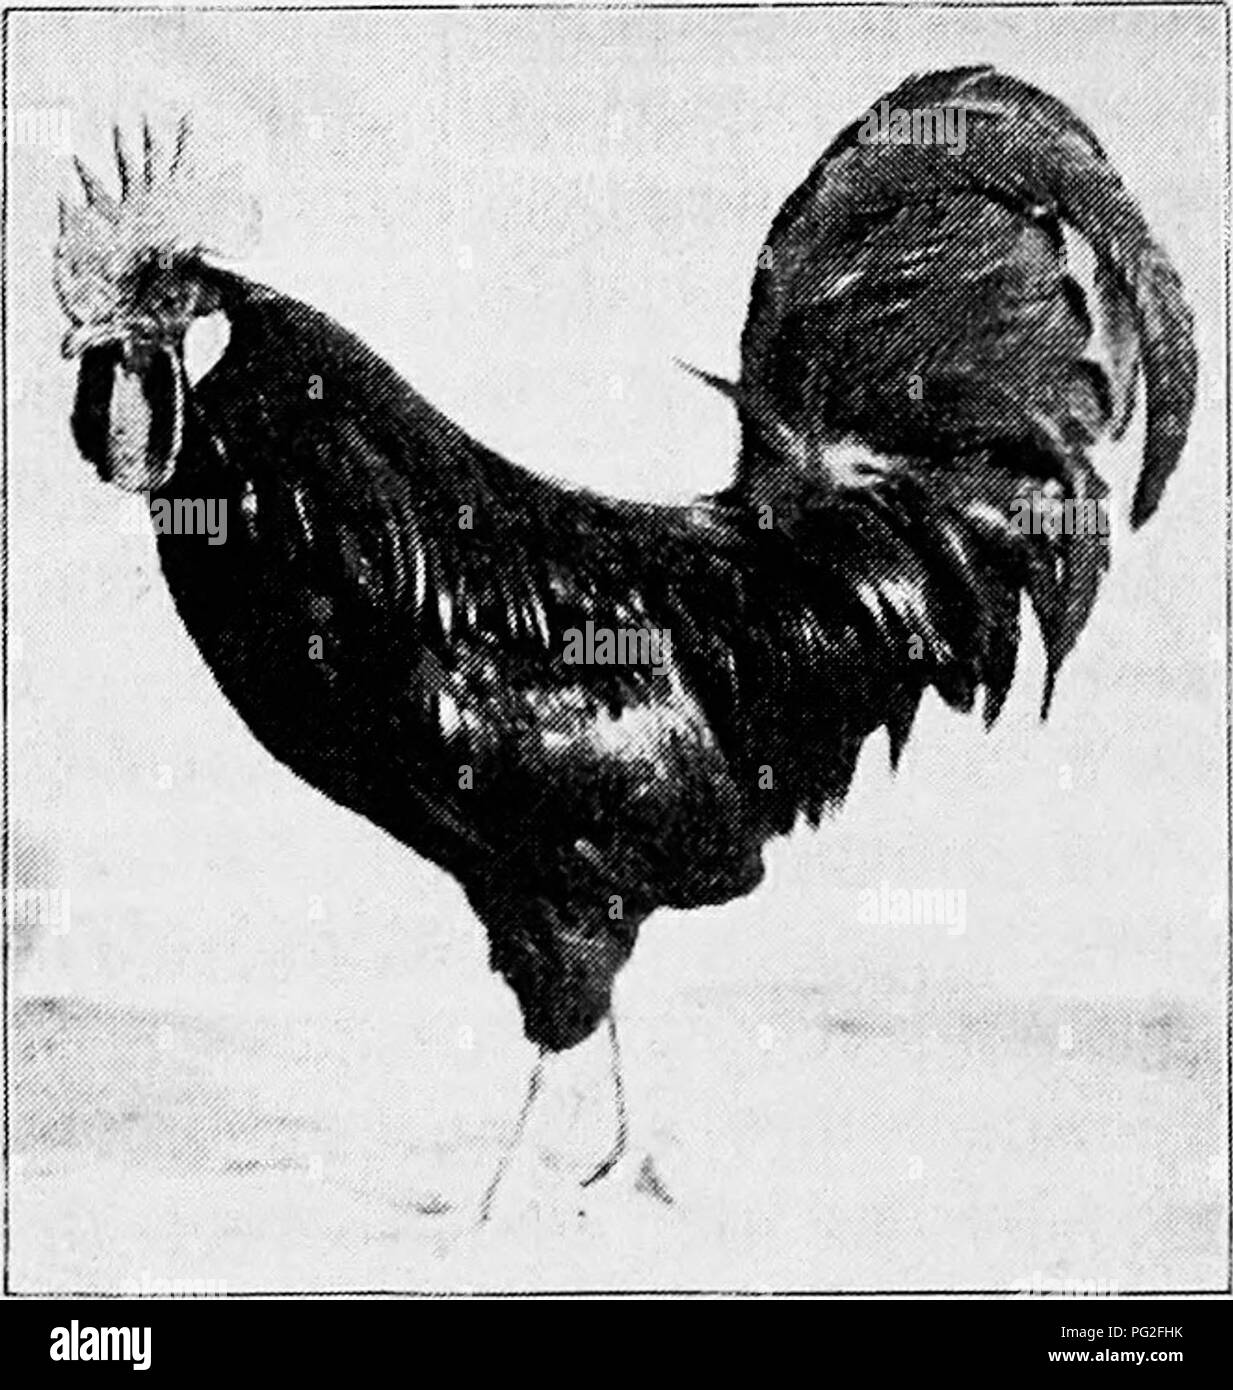 . Principles and practice of poultry culture . Poultry. 356 POULTRY CULTURE. Fig. 341. Single-Comb Brown Leghorn cockerel, Grove Hill poultry yards, Waltham, Massachusetts and ear lobes of the Medi- terranean class, and of size and form appropriate to the style of the bird. The ear lobes are white or creamy white in color. While the body plumage is not as short as that of game fowls, the race is close feathered, with large wings and tails. The shanks and feet are smooth, the number of toes normal,—four on each foot. The English type of Leghorn is larger than the American, and meatier, ap- proa Stock Photo